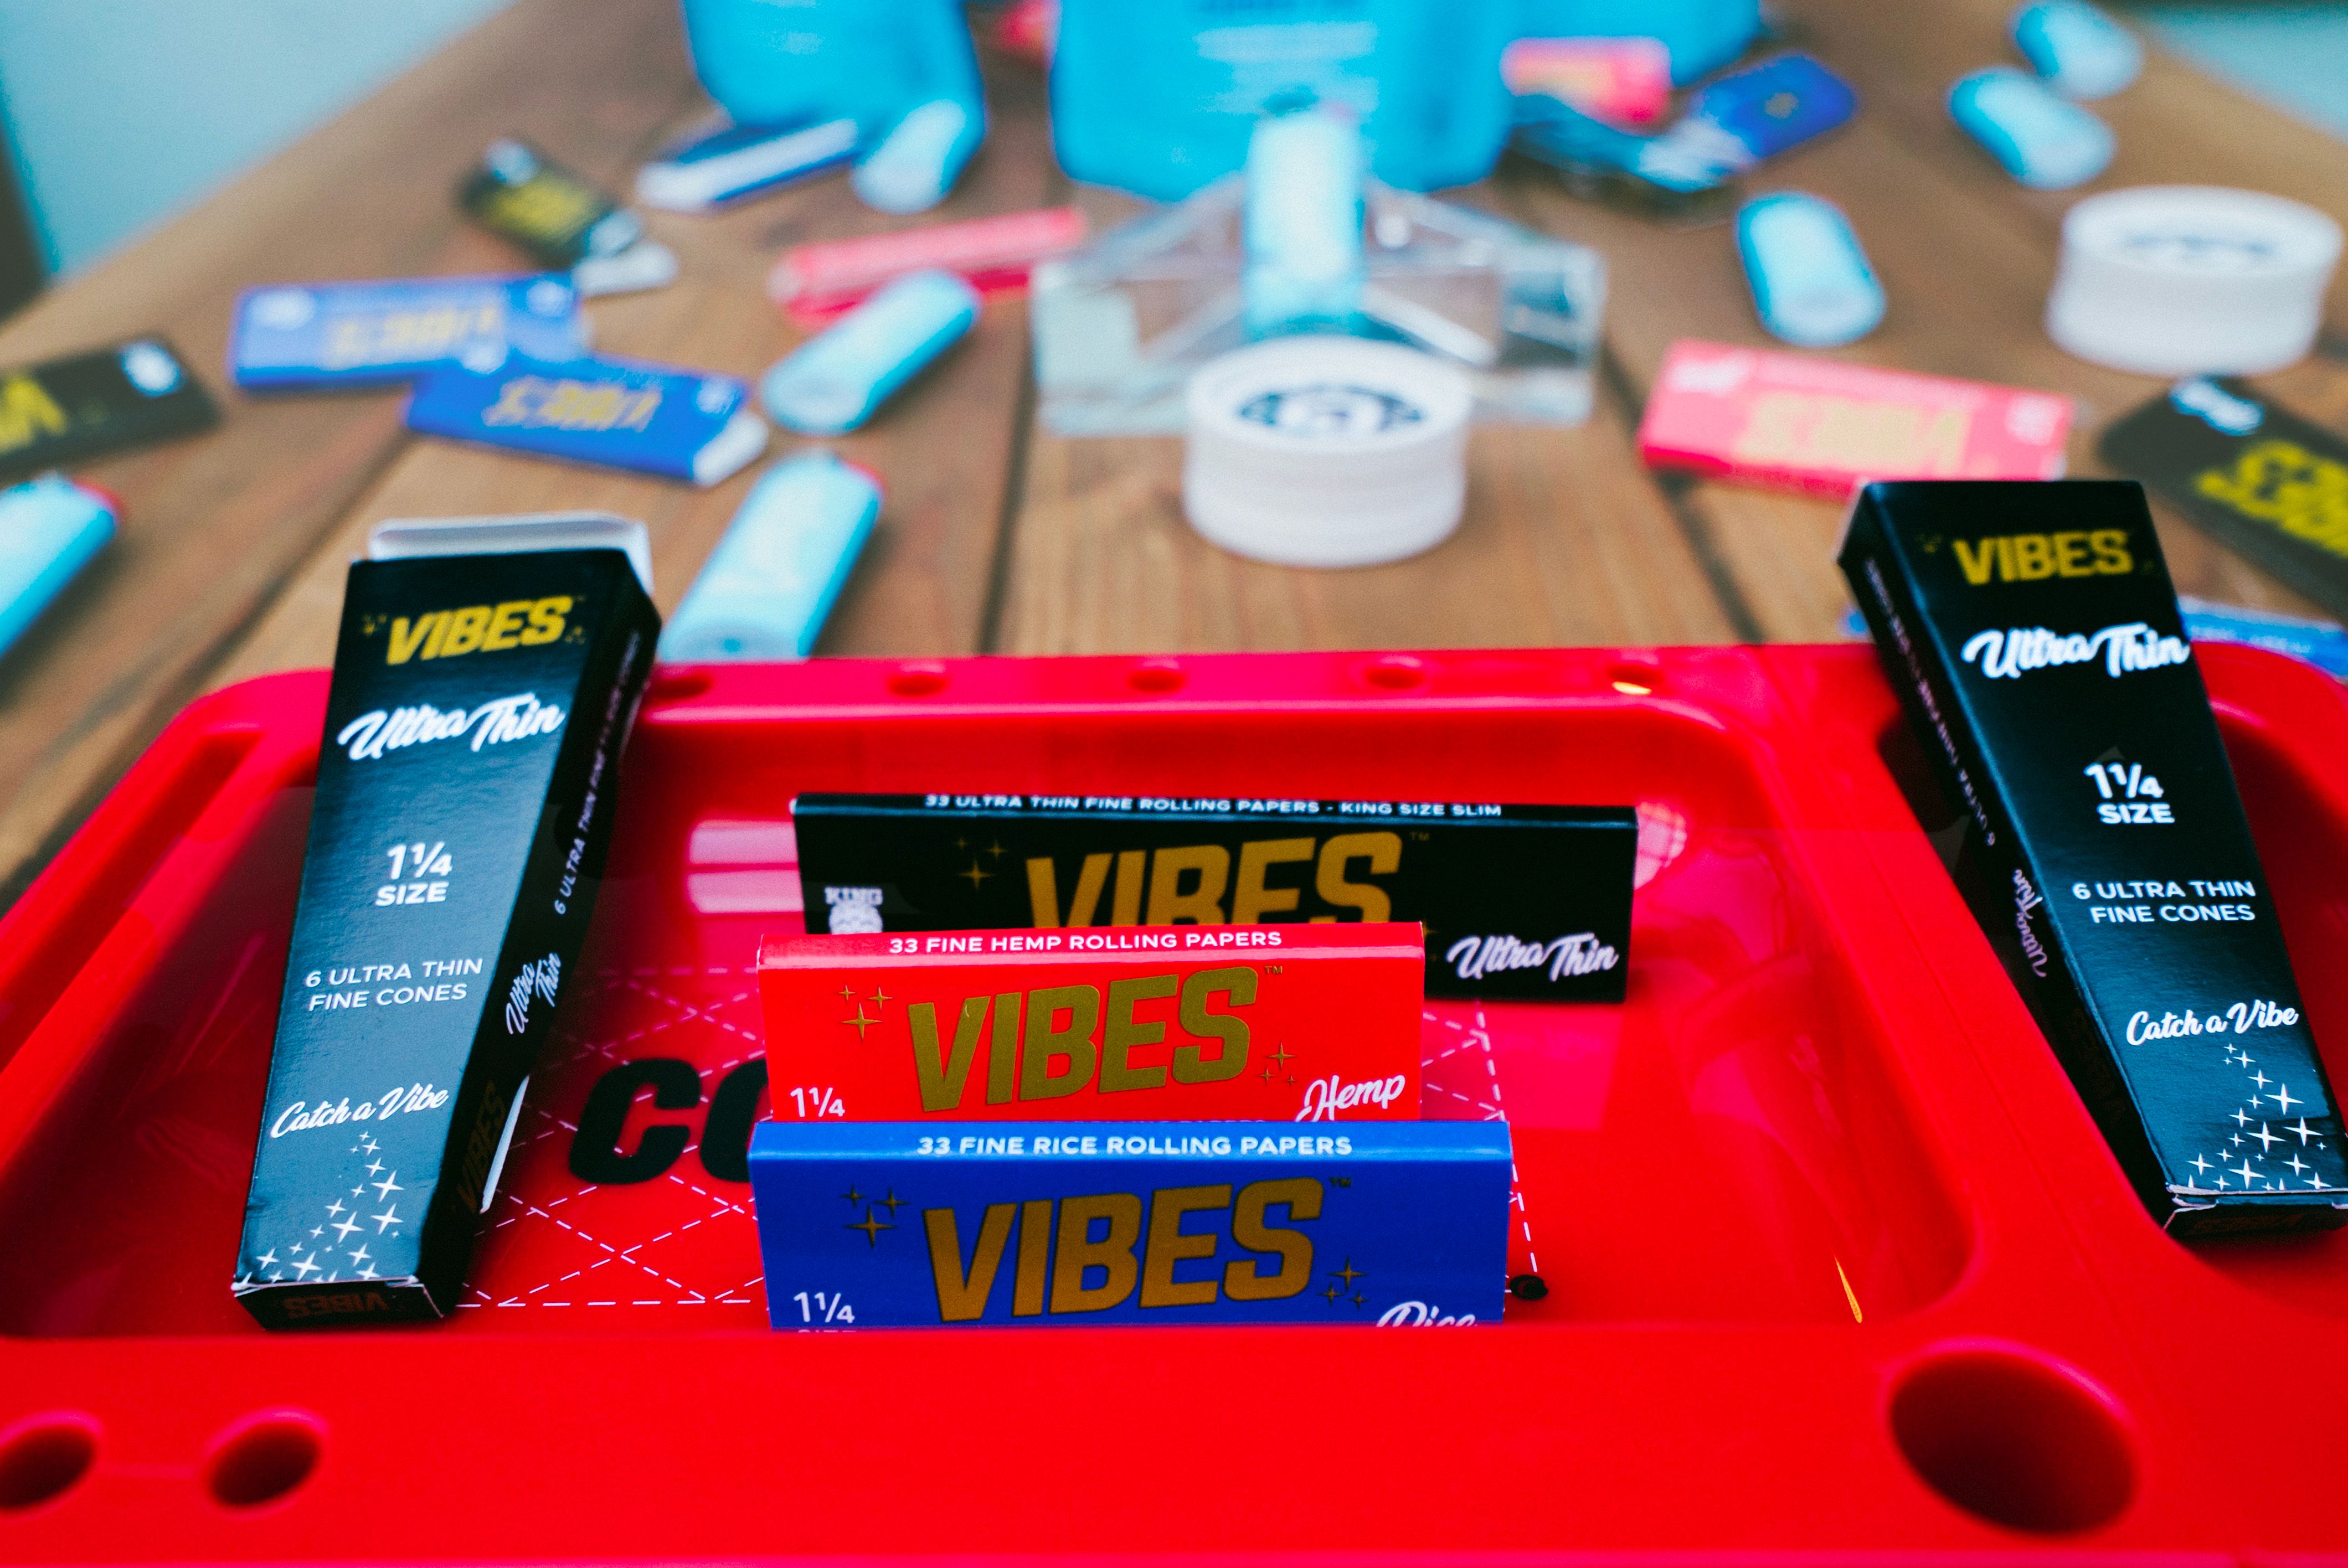 VIBES papers